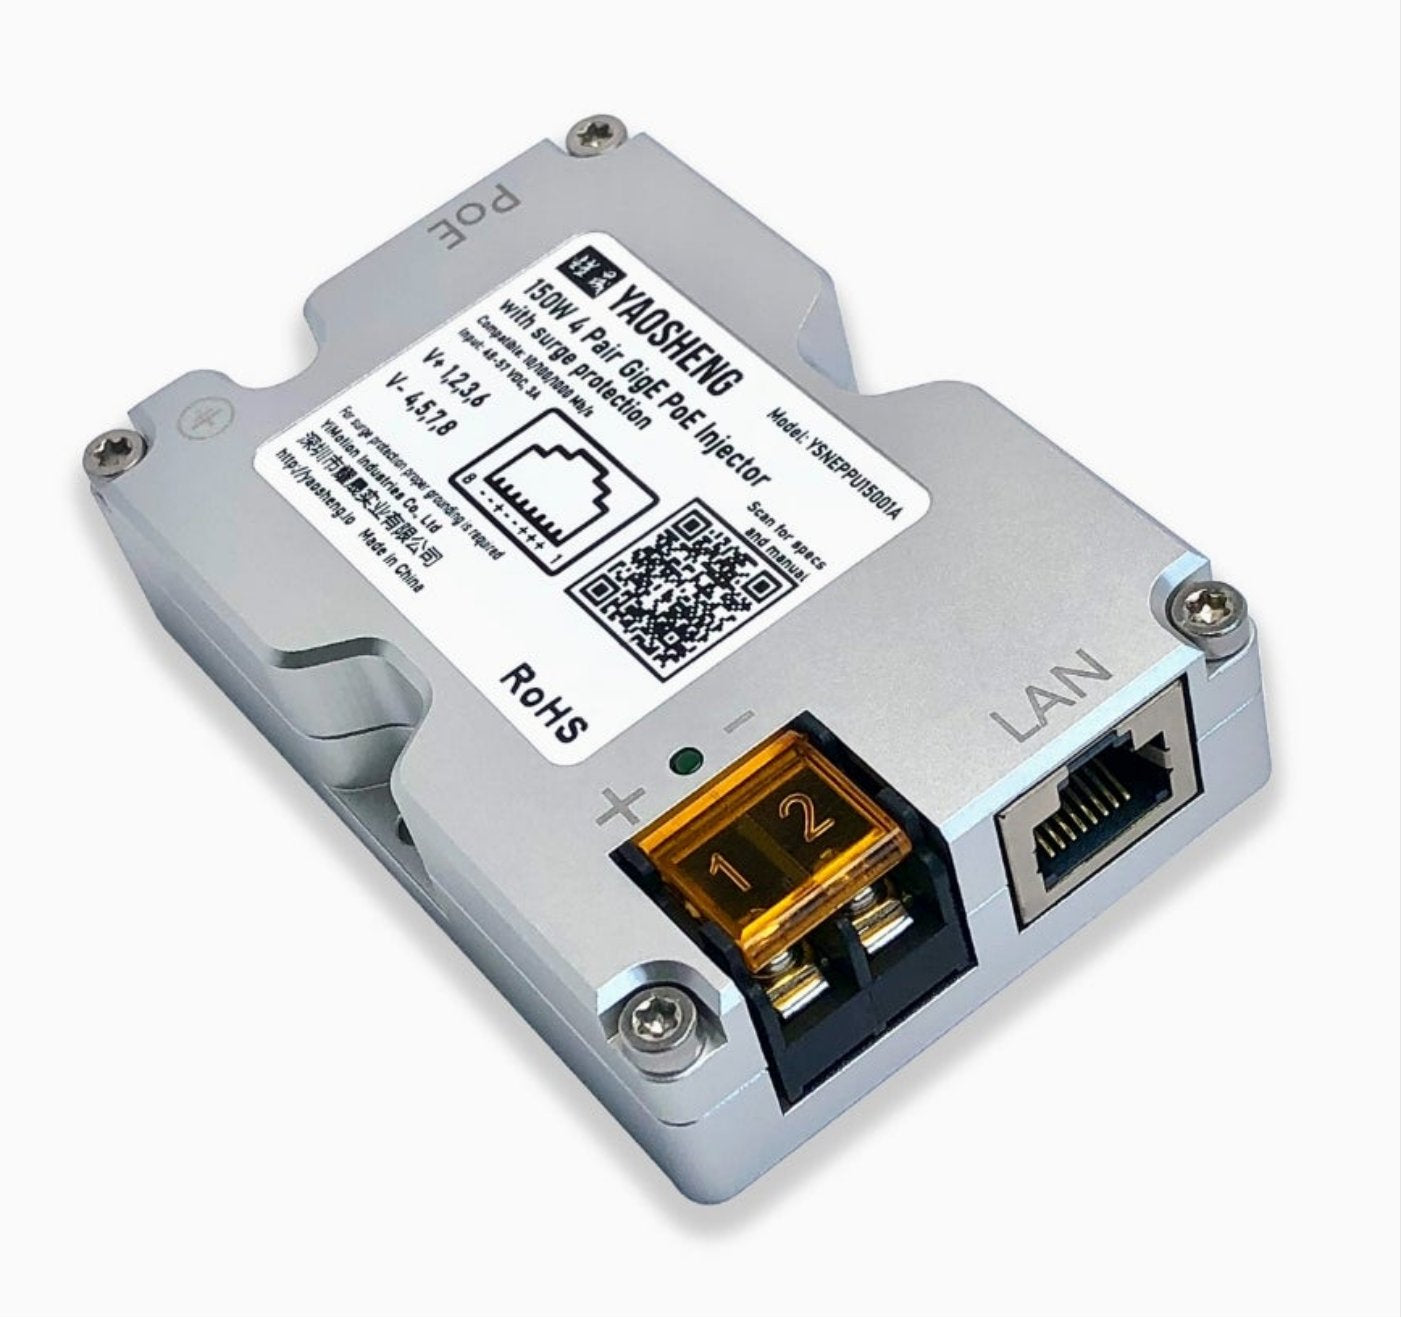 150W GigE Passive PoE Injector with Surge Protection, Developed for Dishy V2 pinout. 48-57V / 3A / 150W